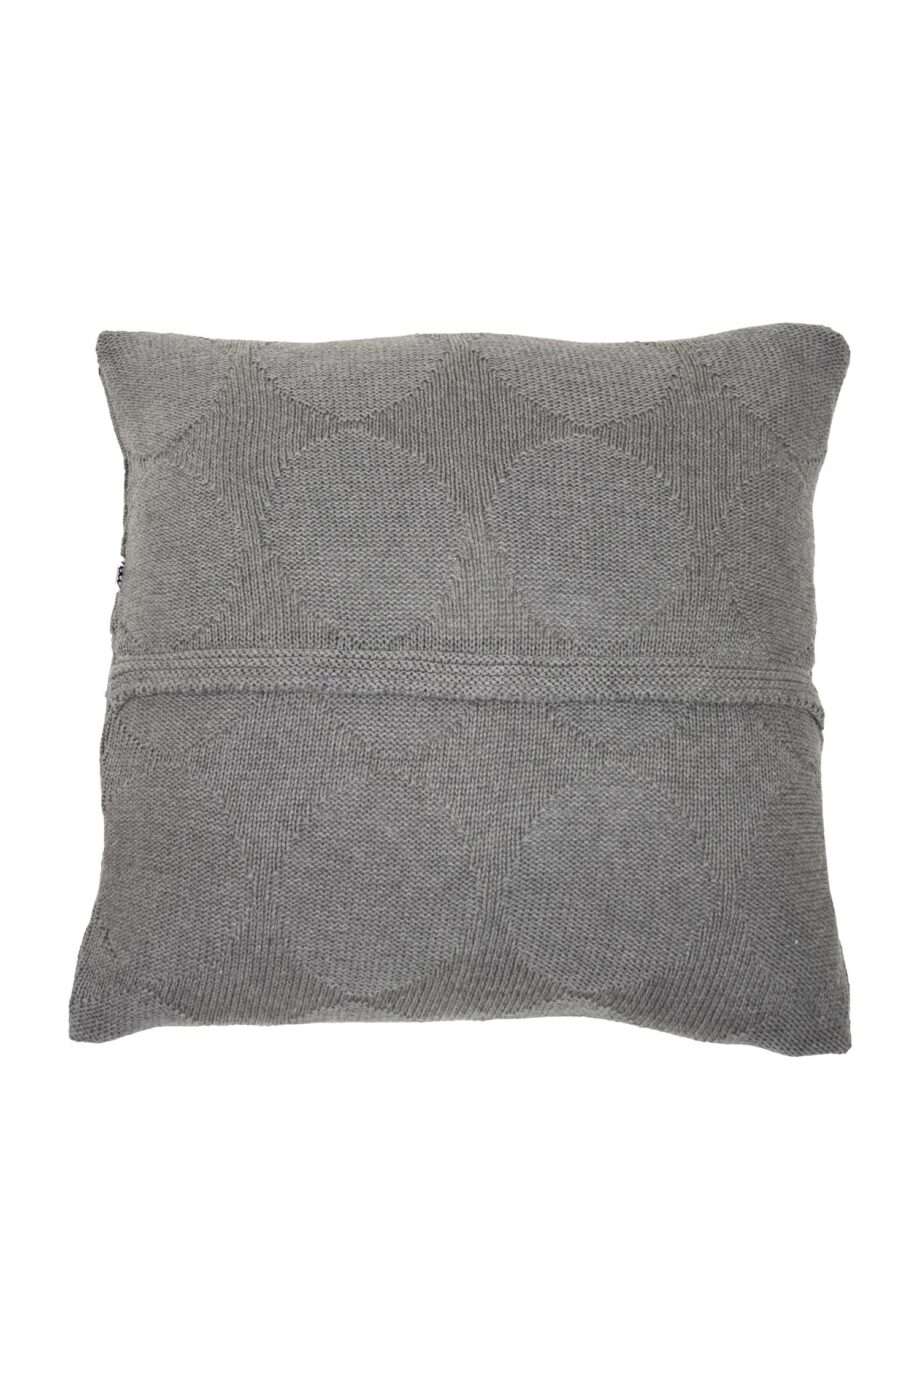 spots grey knitted cotton pillowcase xsmall